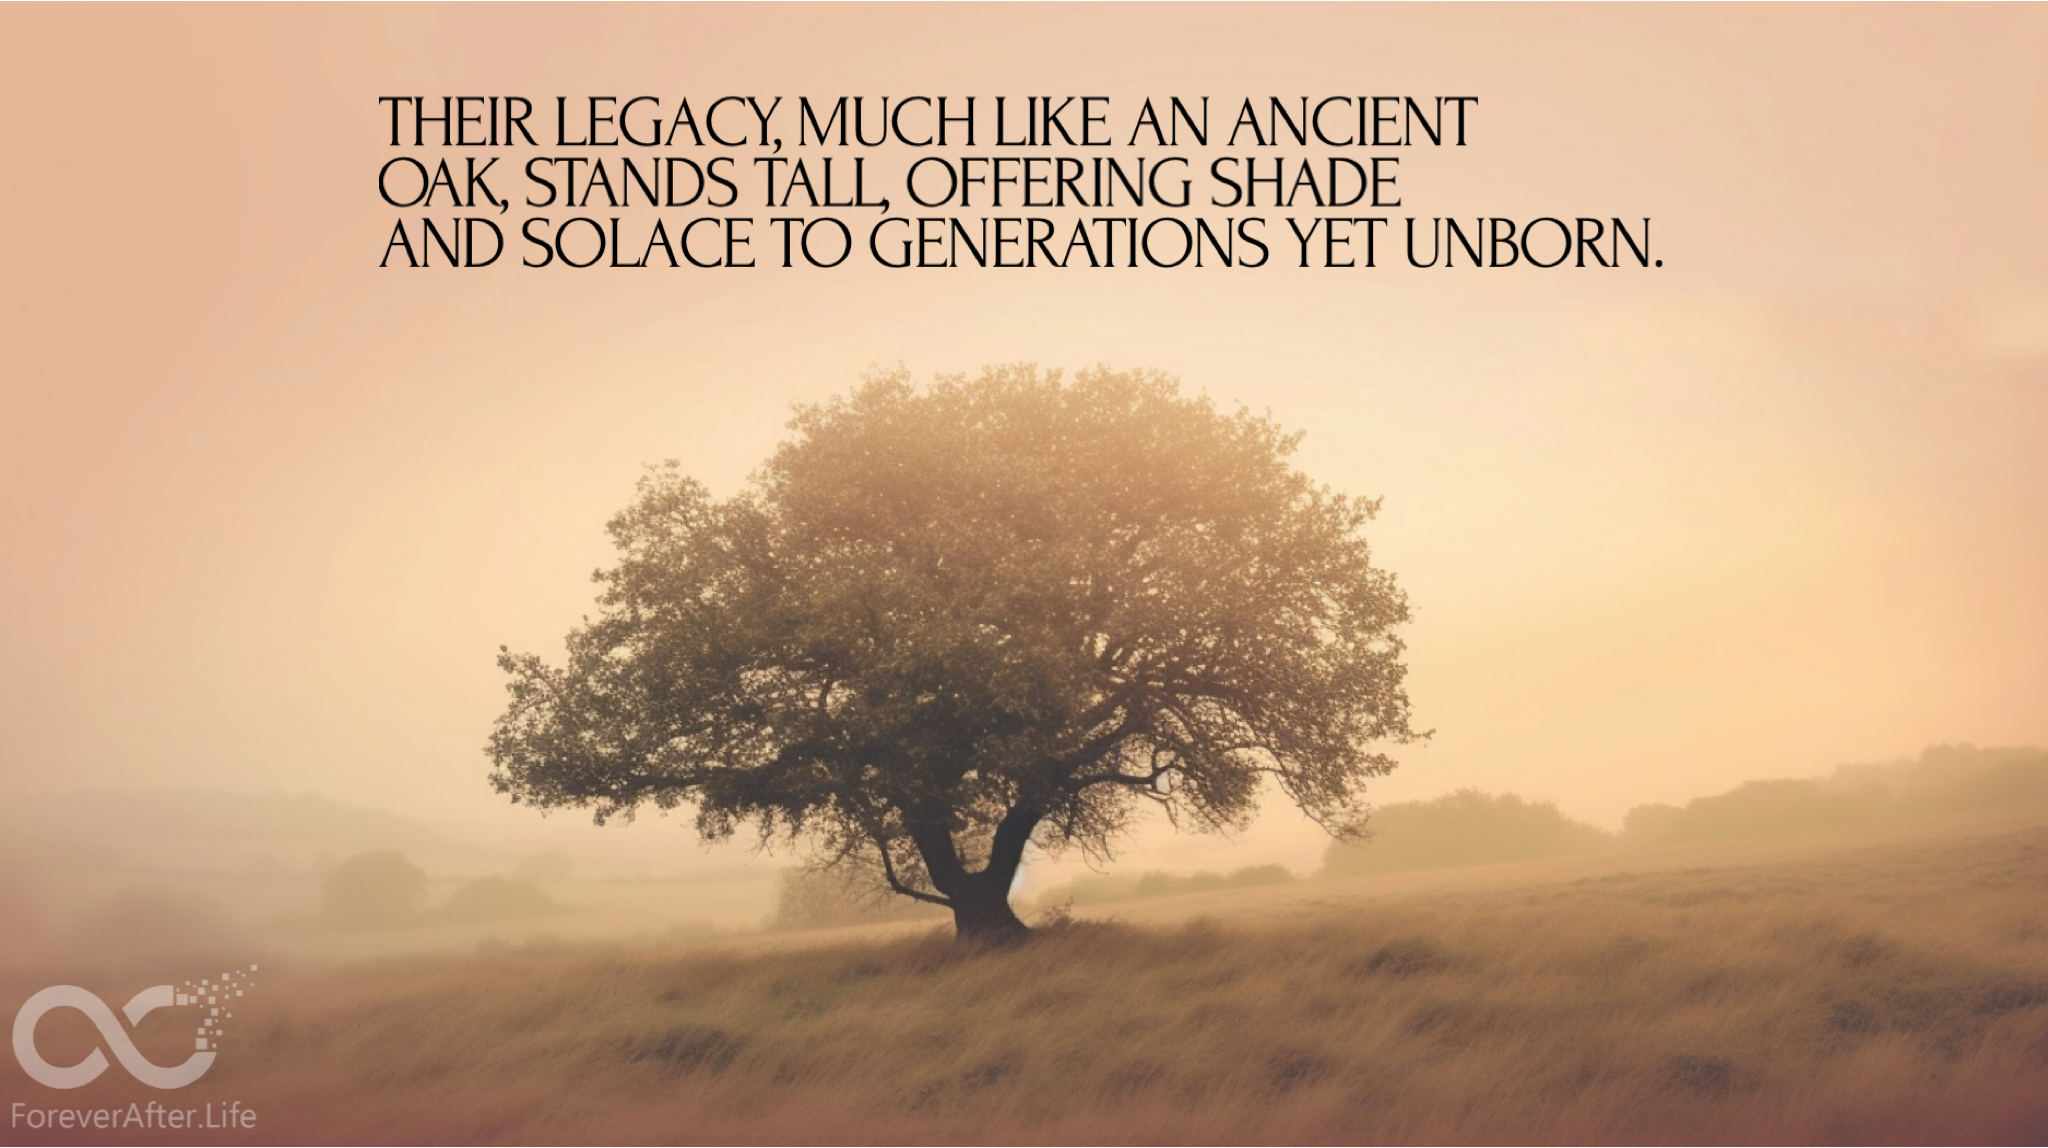 Their legacy, much like an ancient oak, stands tall, offering shade and solace to generations yet unborn.